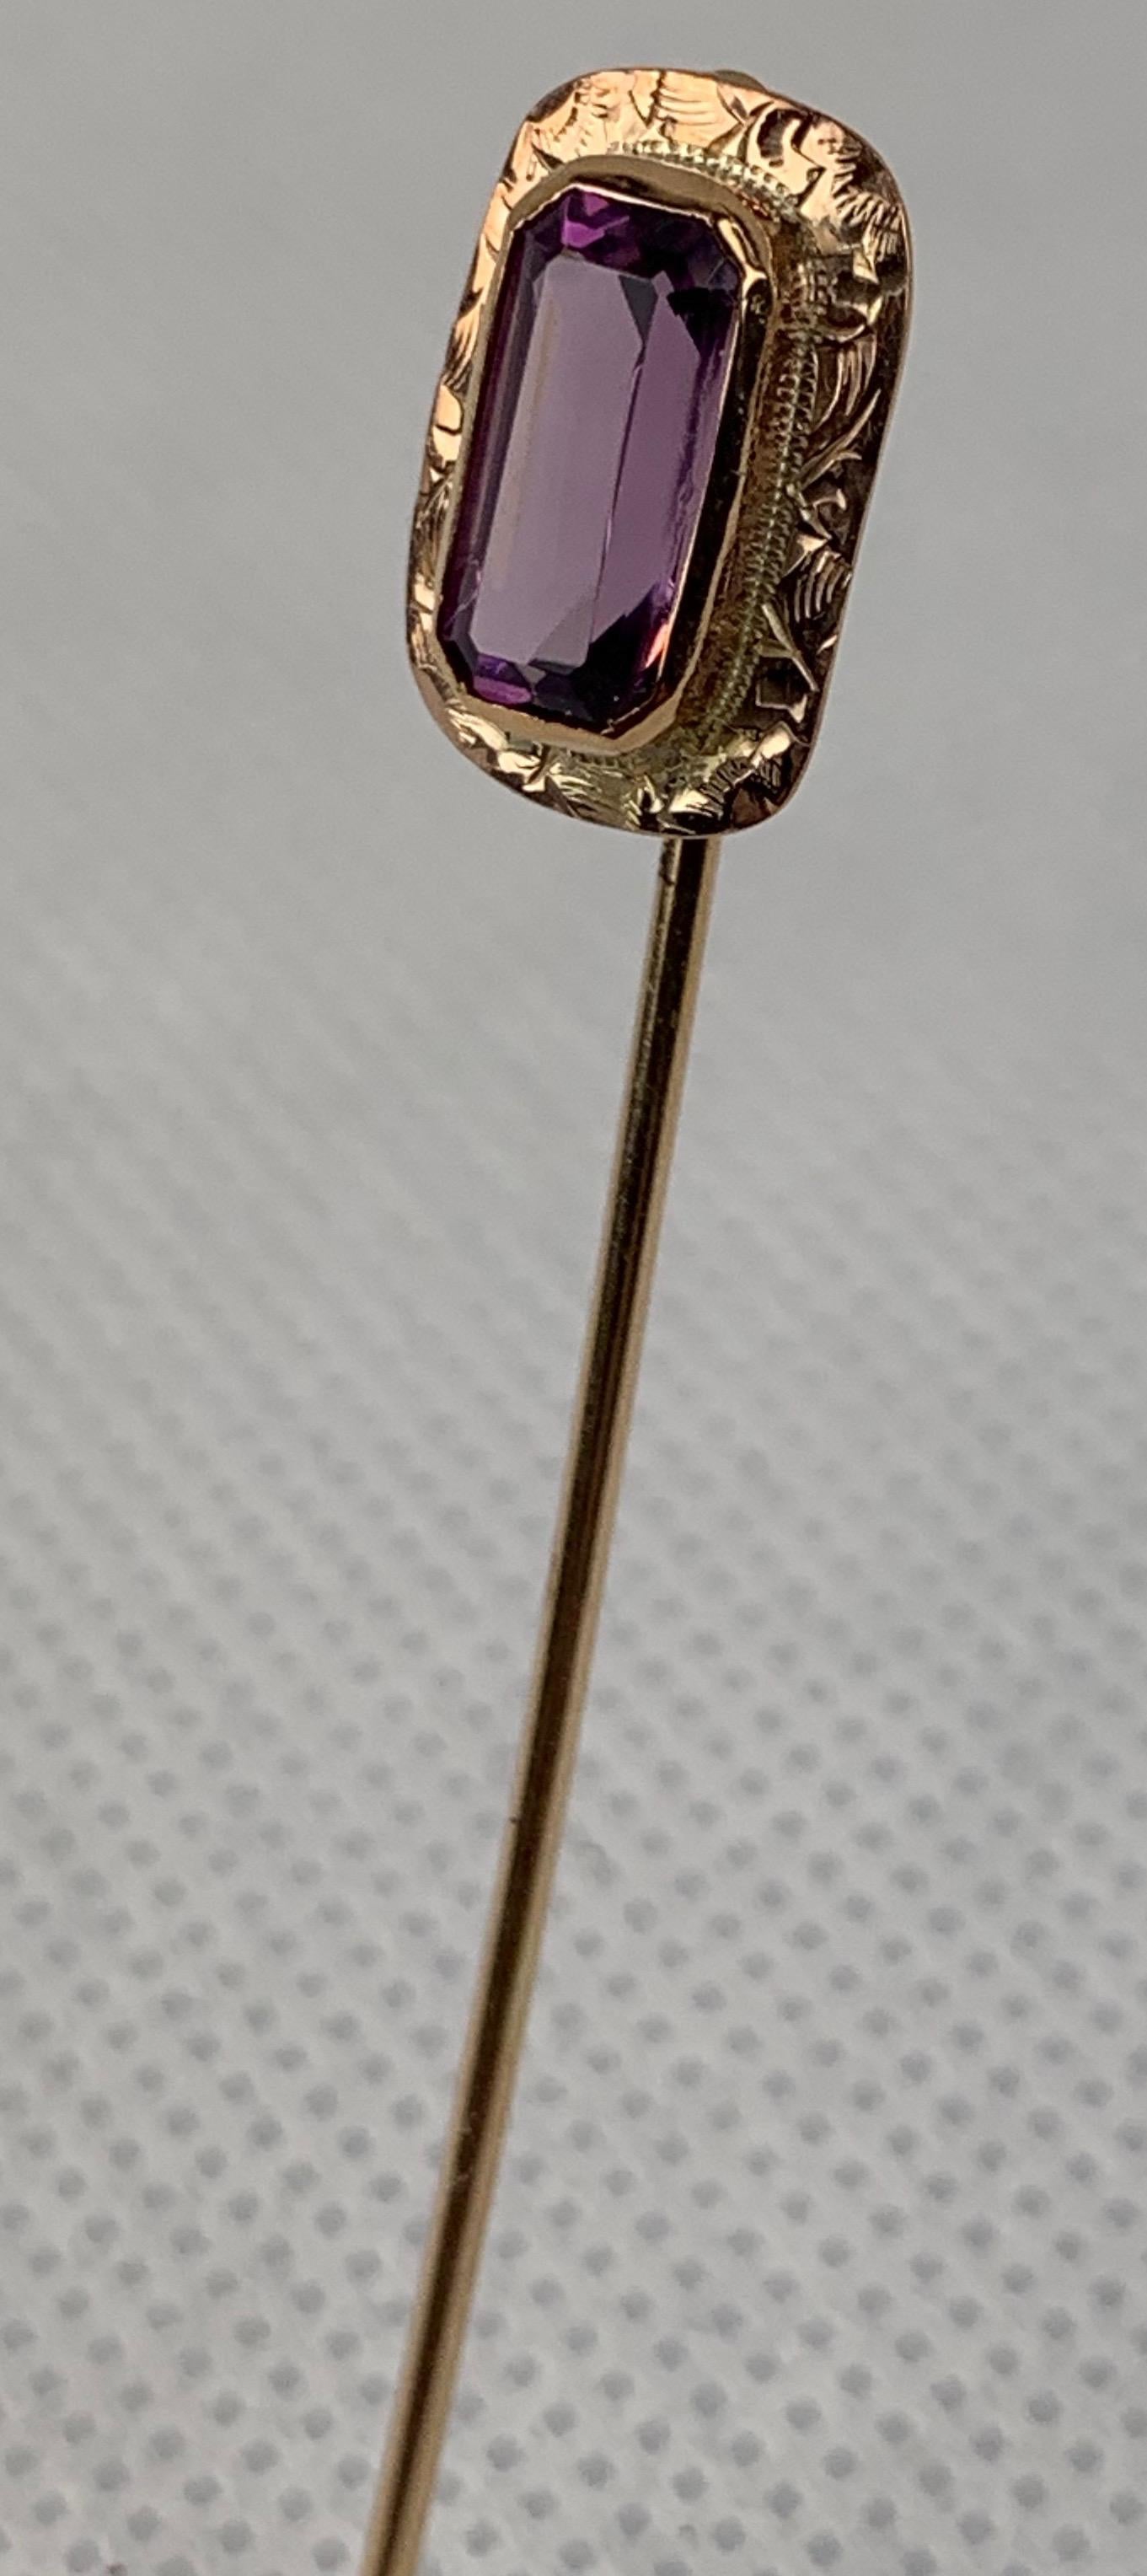 Stickpin with a Rectangular Frame, Faceted Amethyst & Hand Engraved-10k y.g. In Good Condition For Sale In West Palm Beach, FL